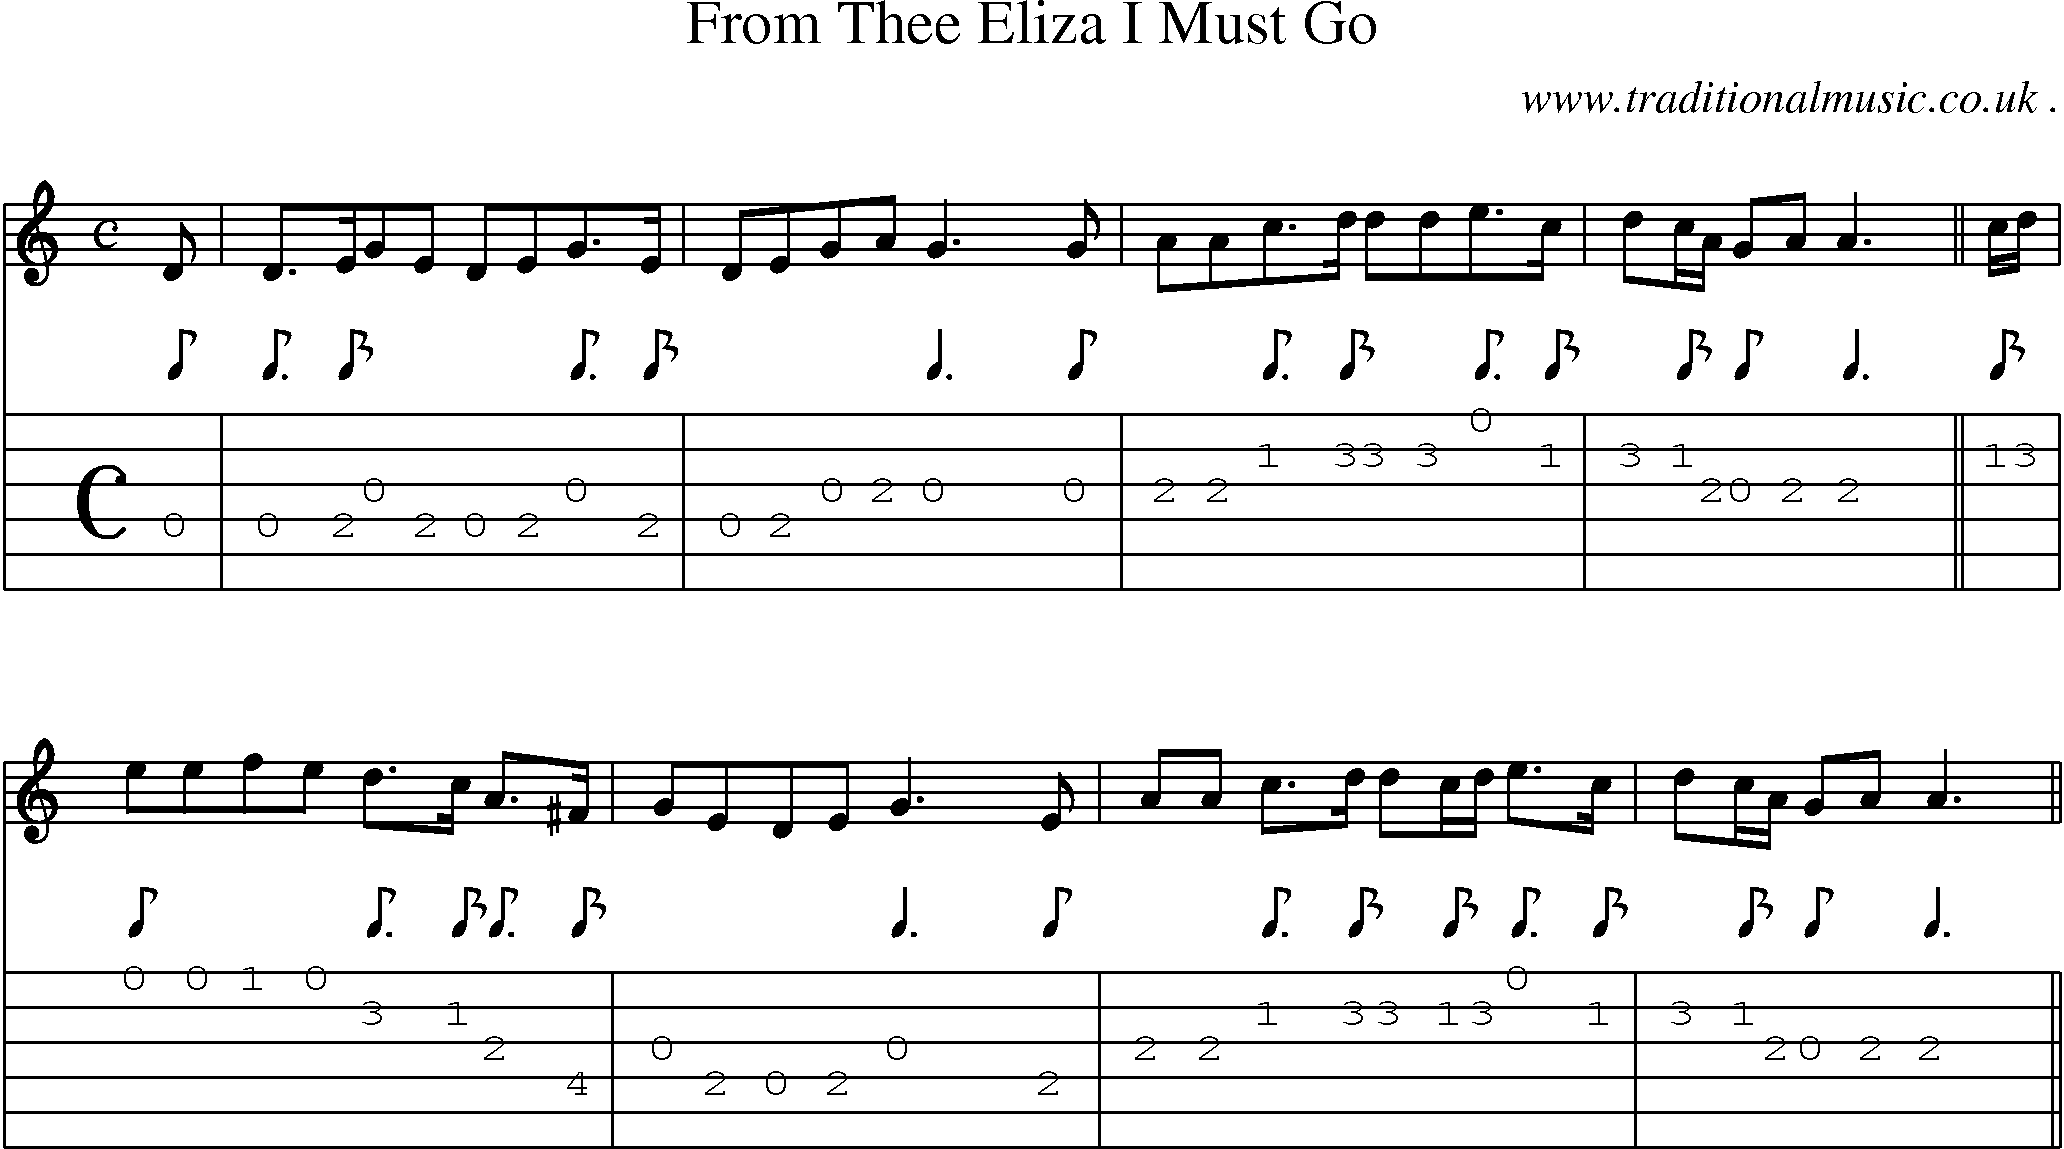 Sheet-Music and Guitar Tabs for From Thee Eliza I Must Go